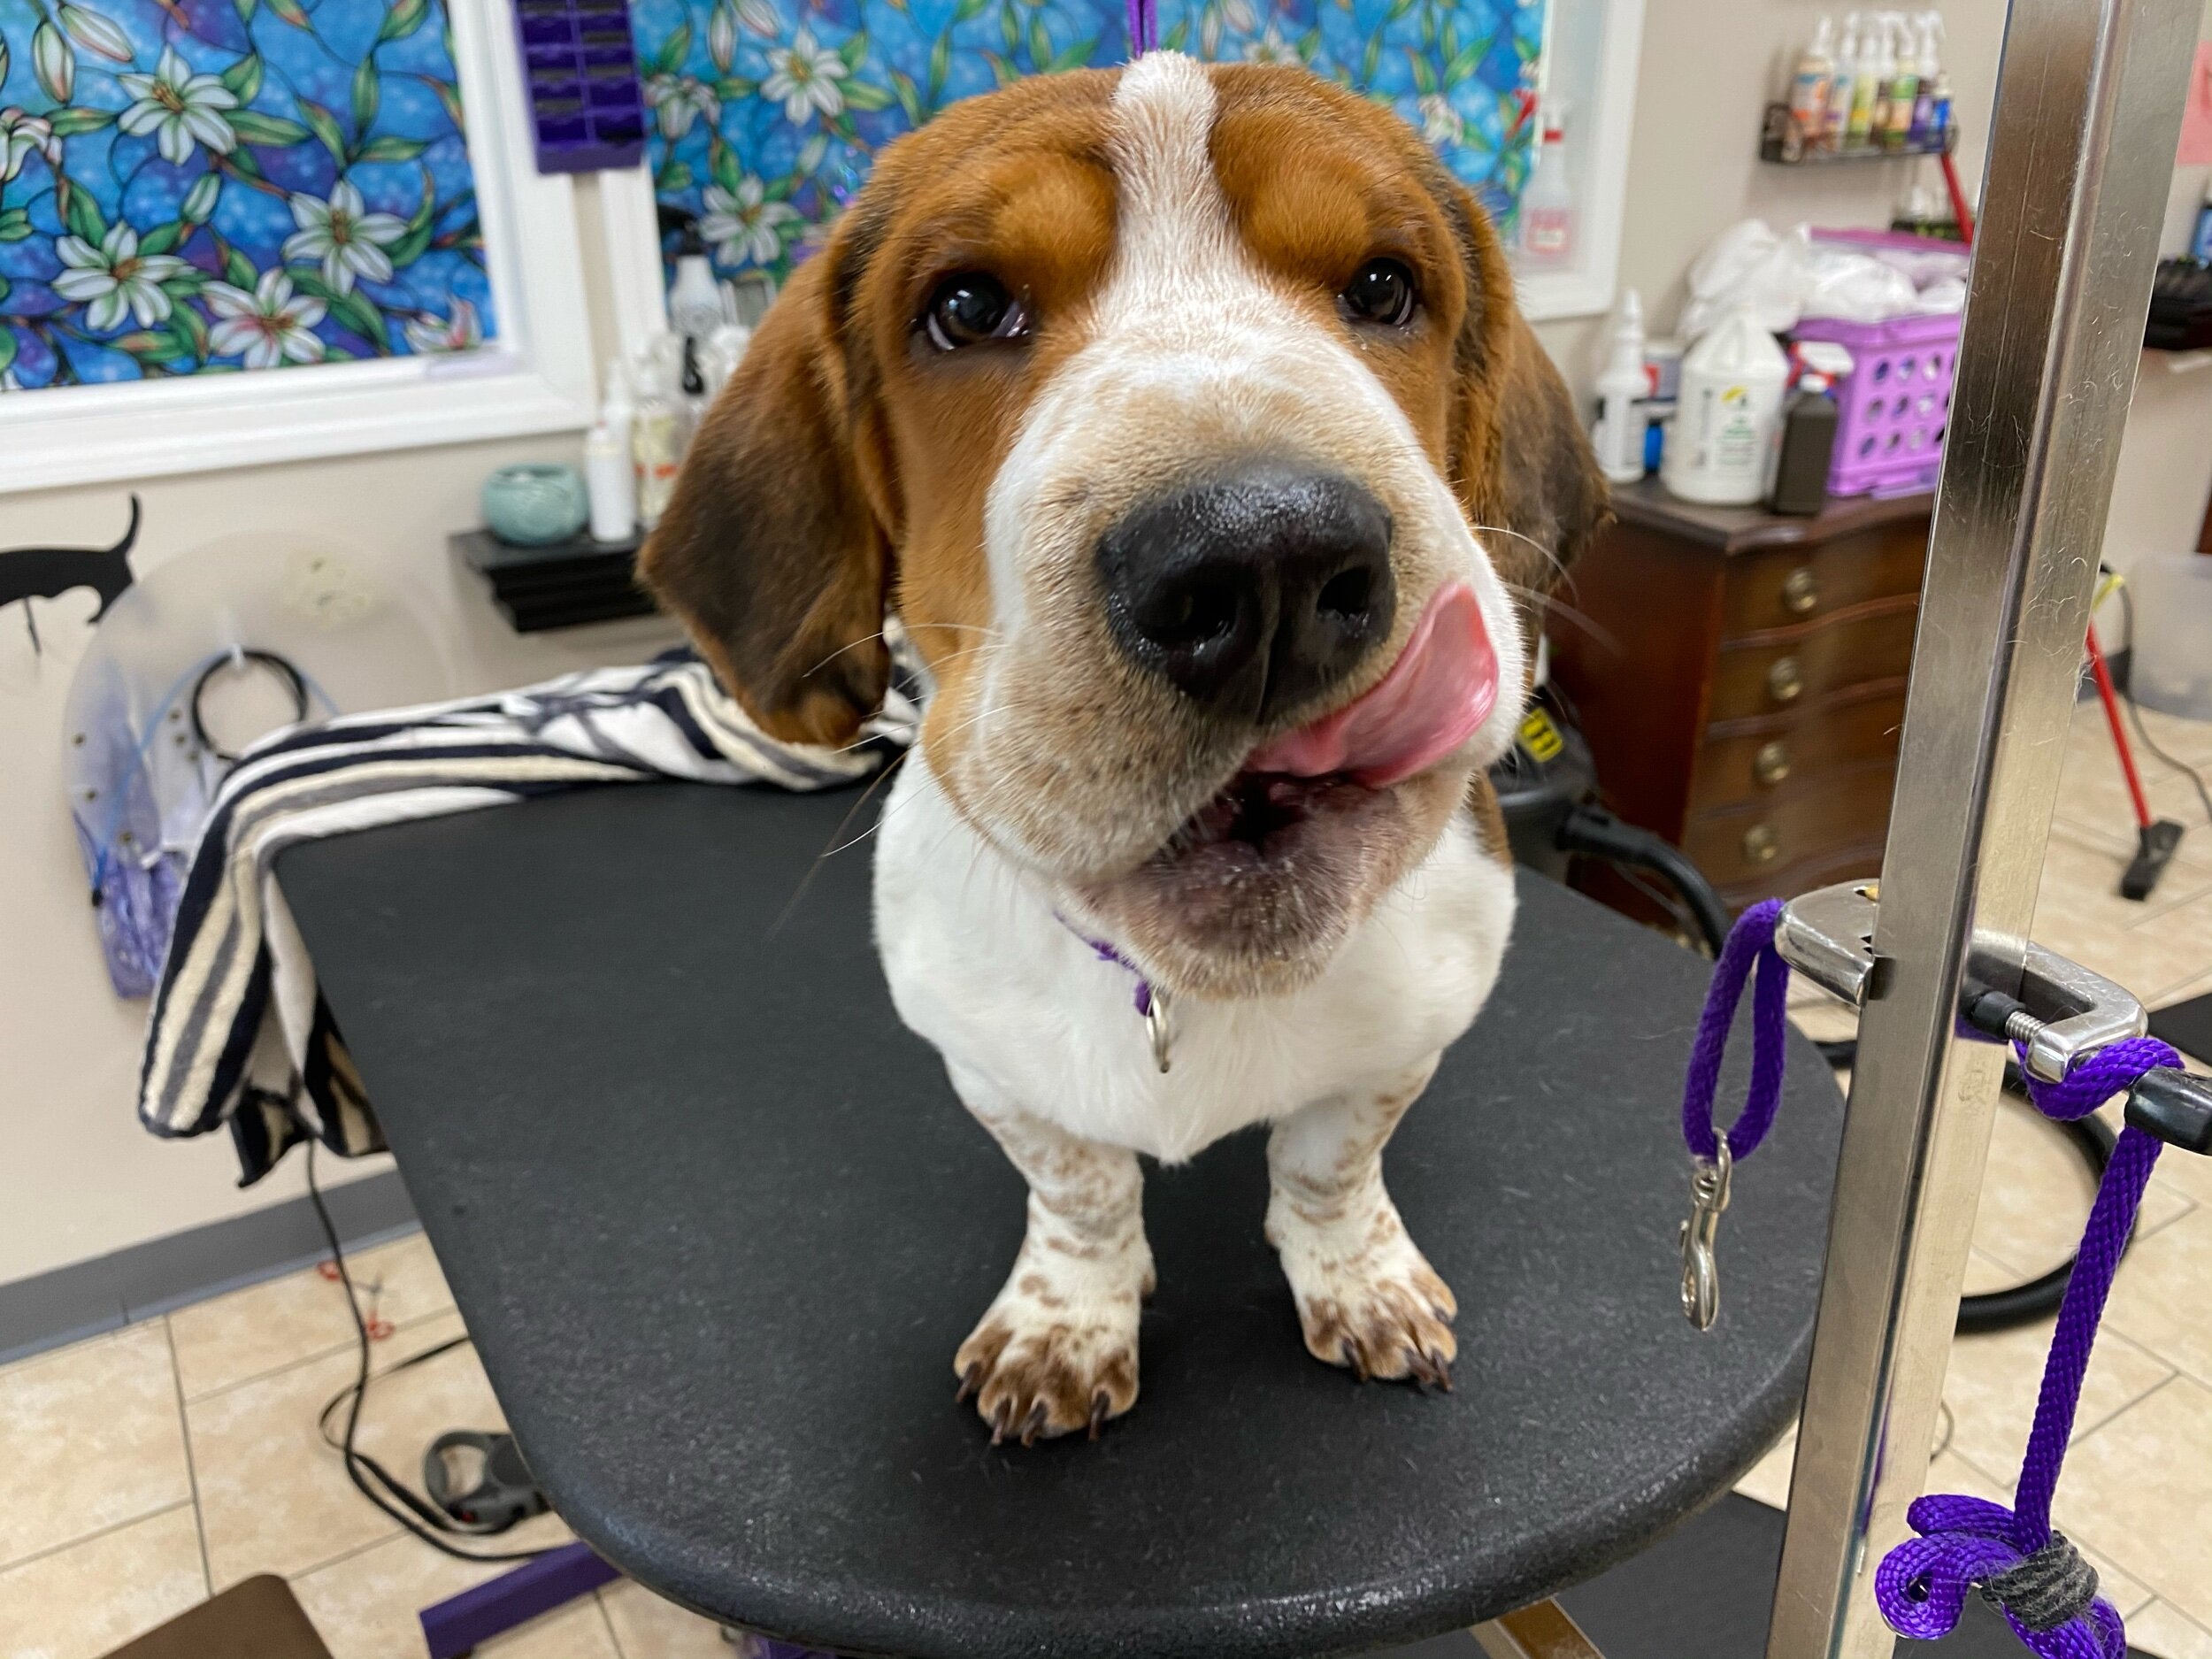 Dogs love coming to Perfect Paw for haircuts, teeth cleaning, and more!